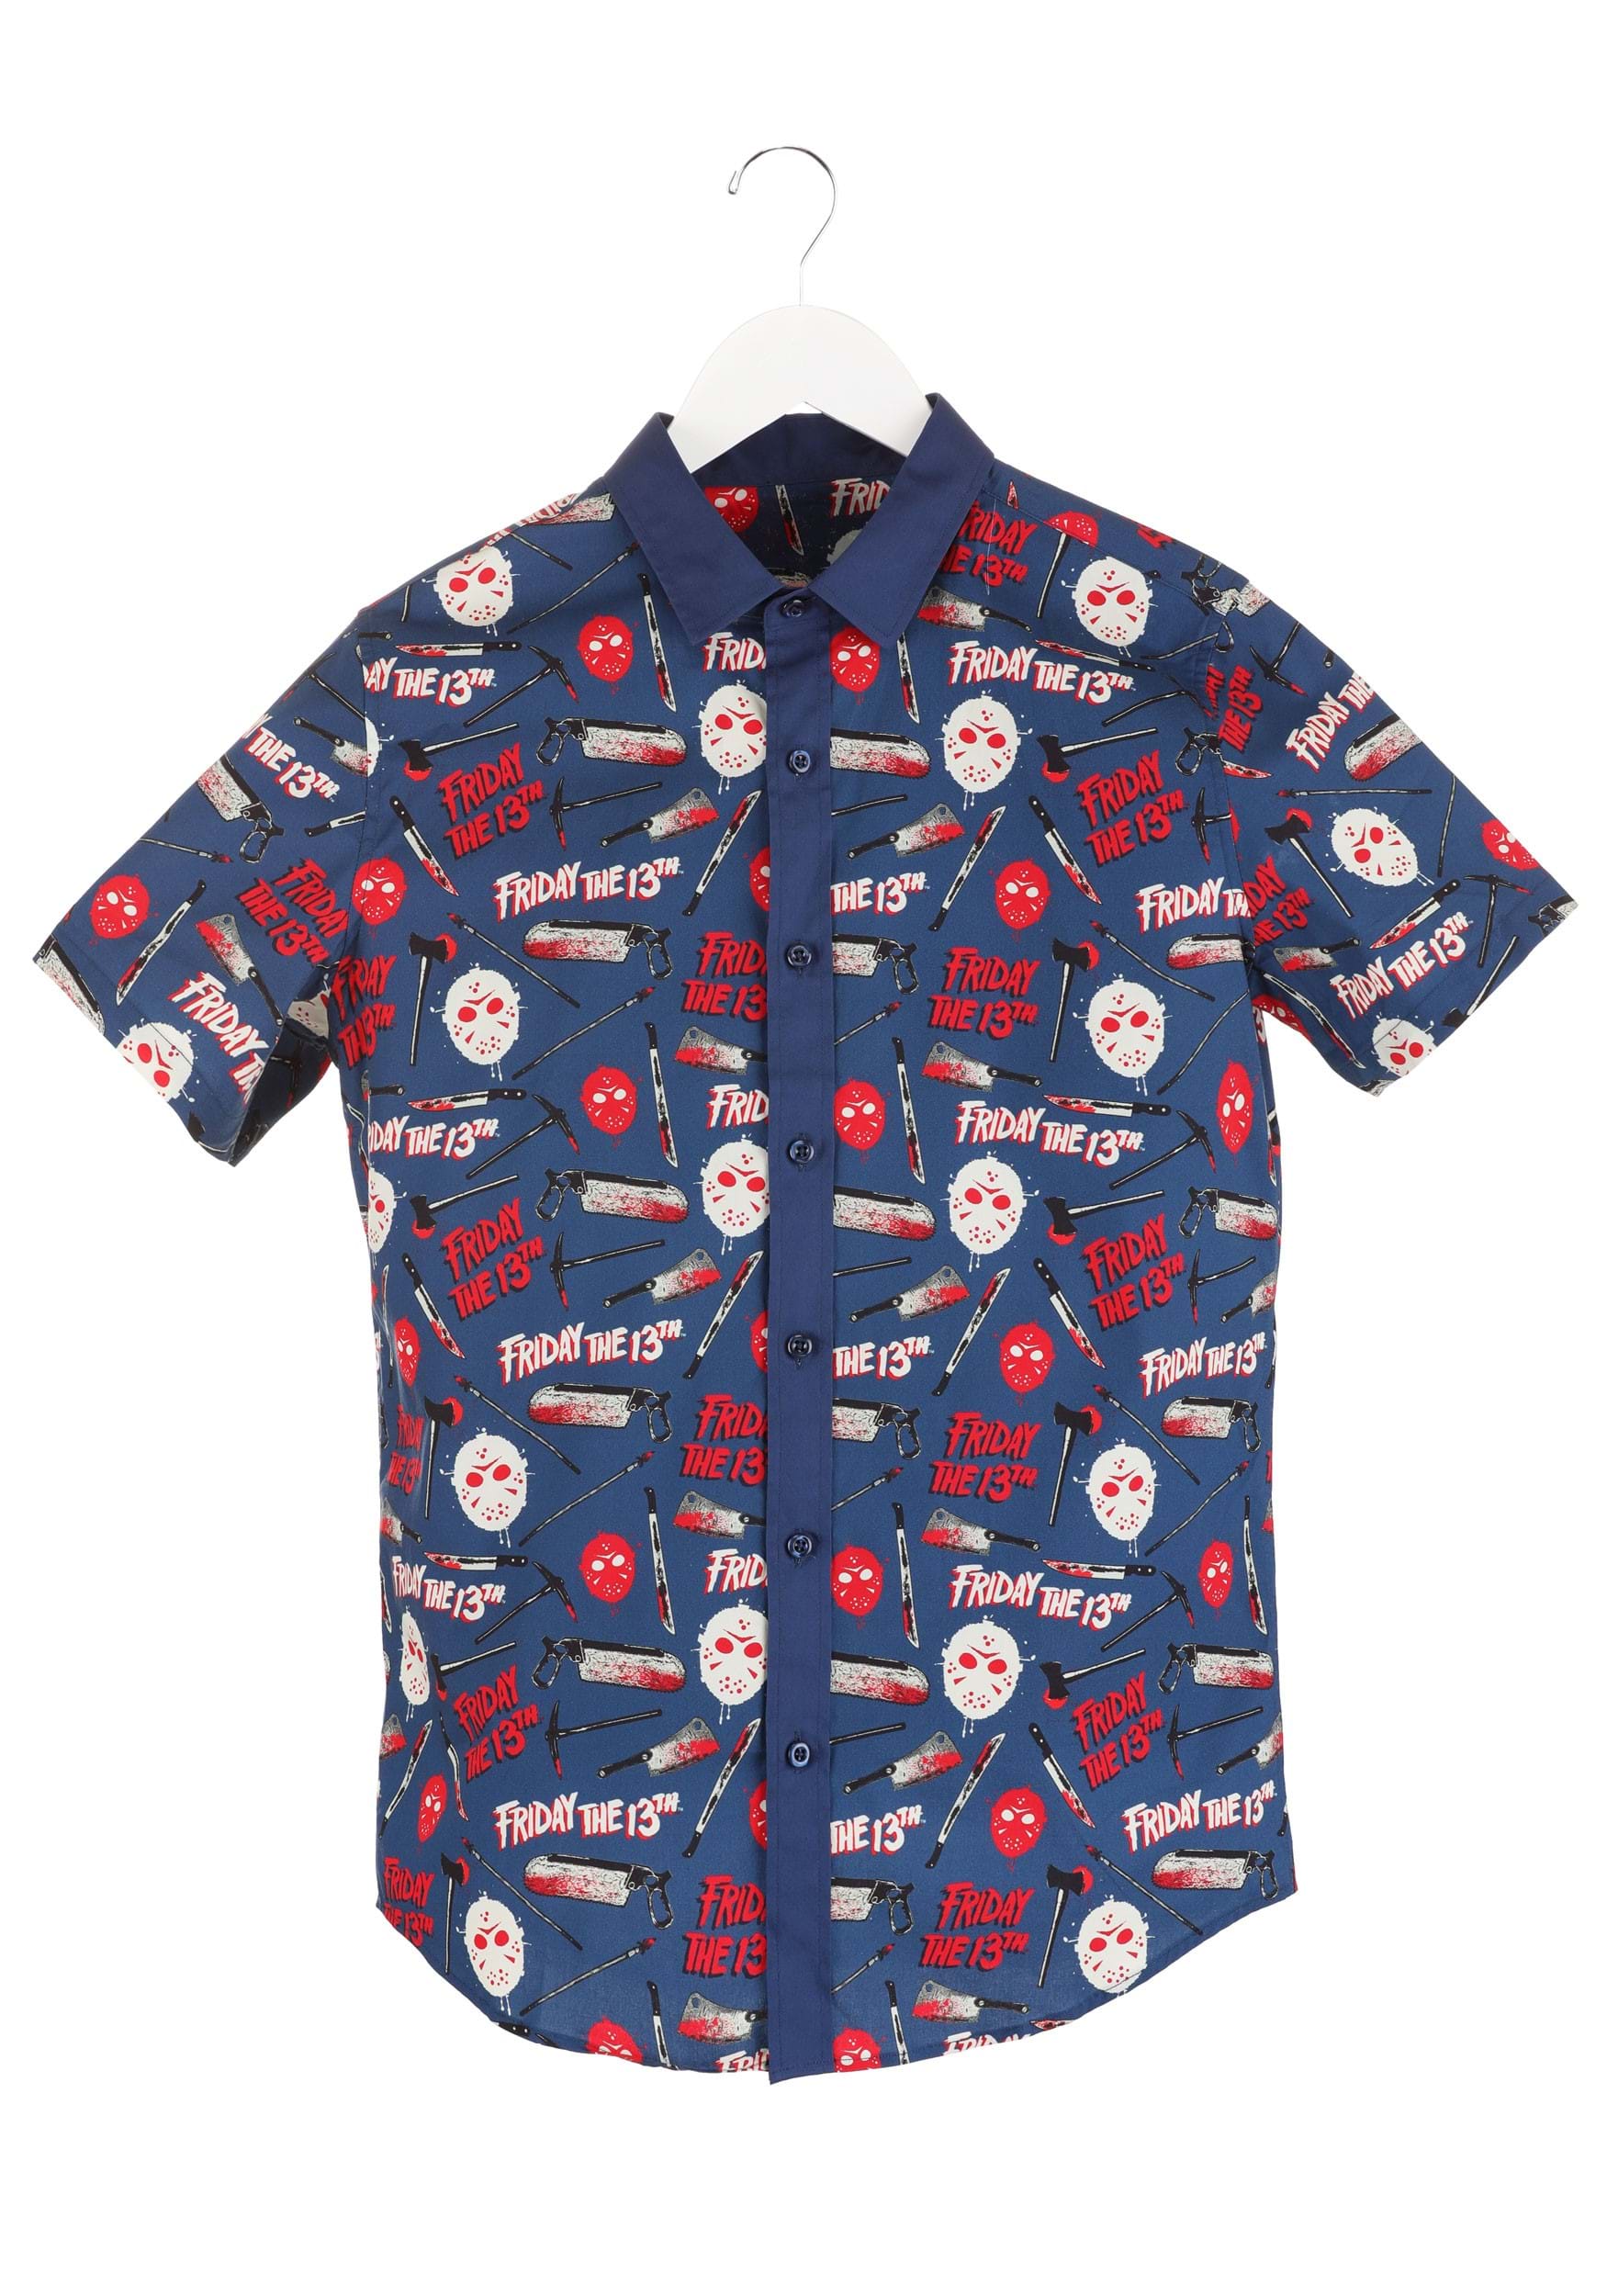 Friday the 13th button up shirt